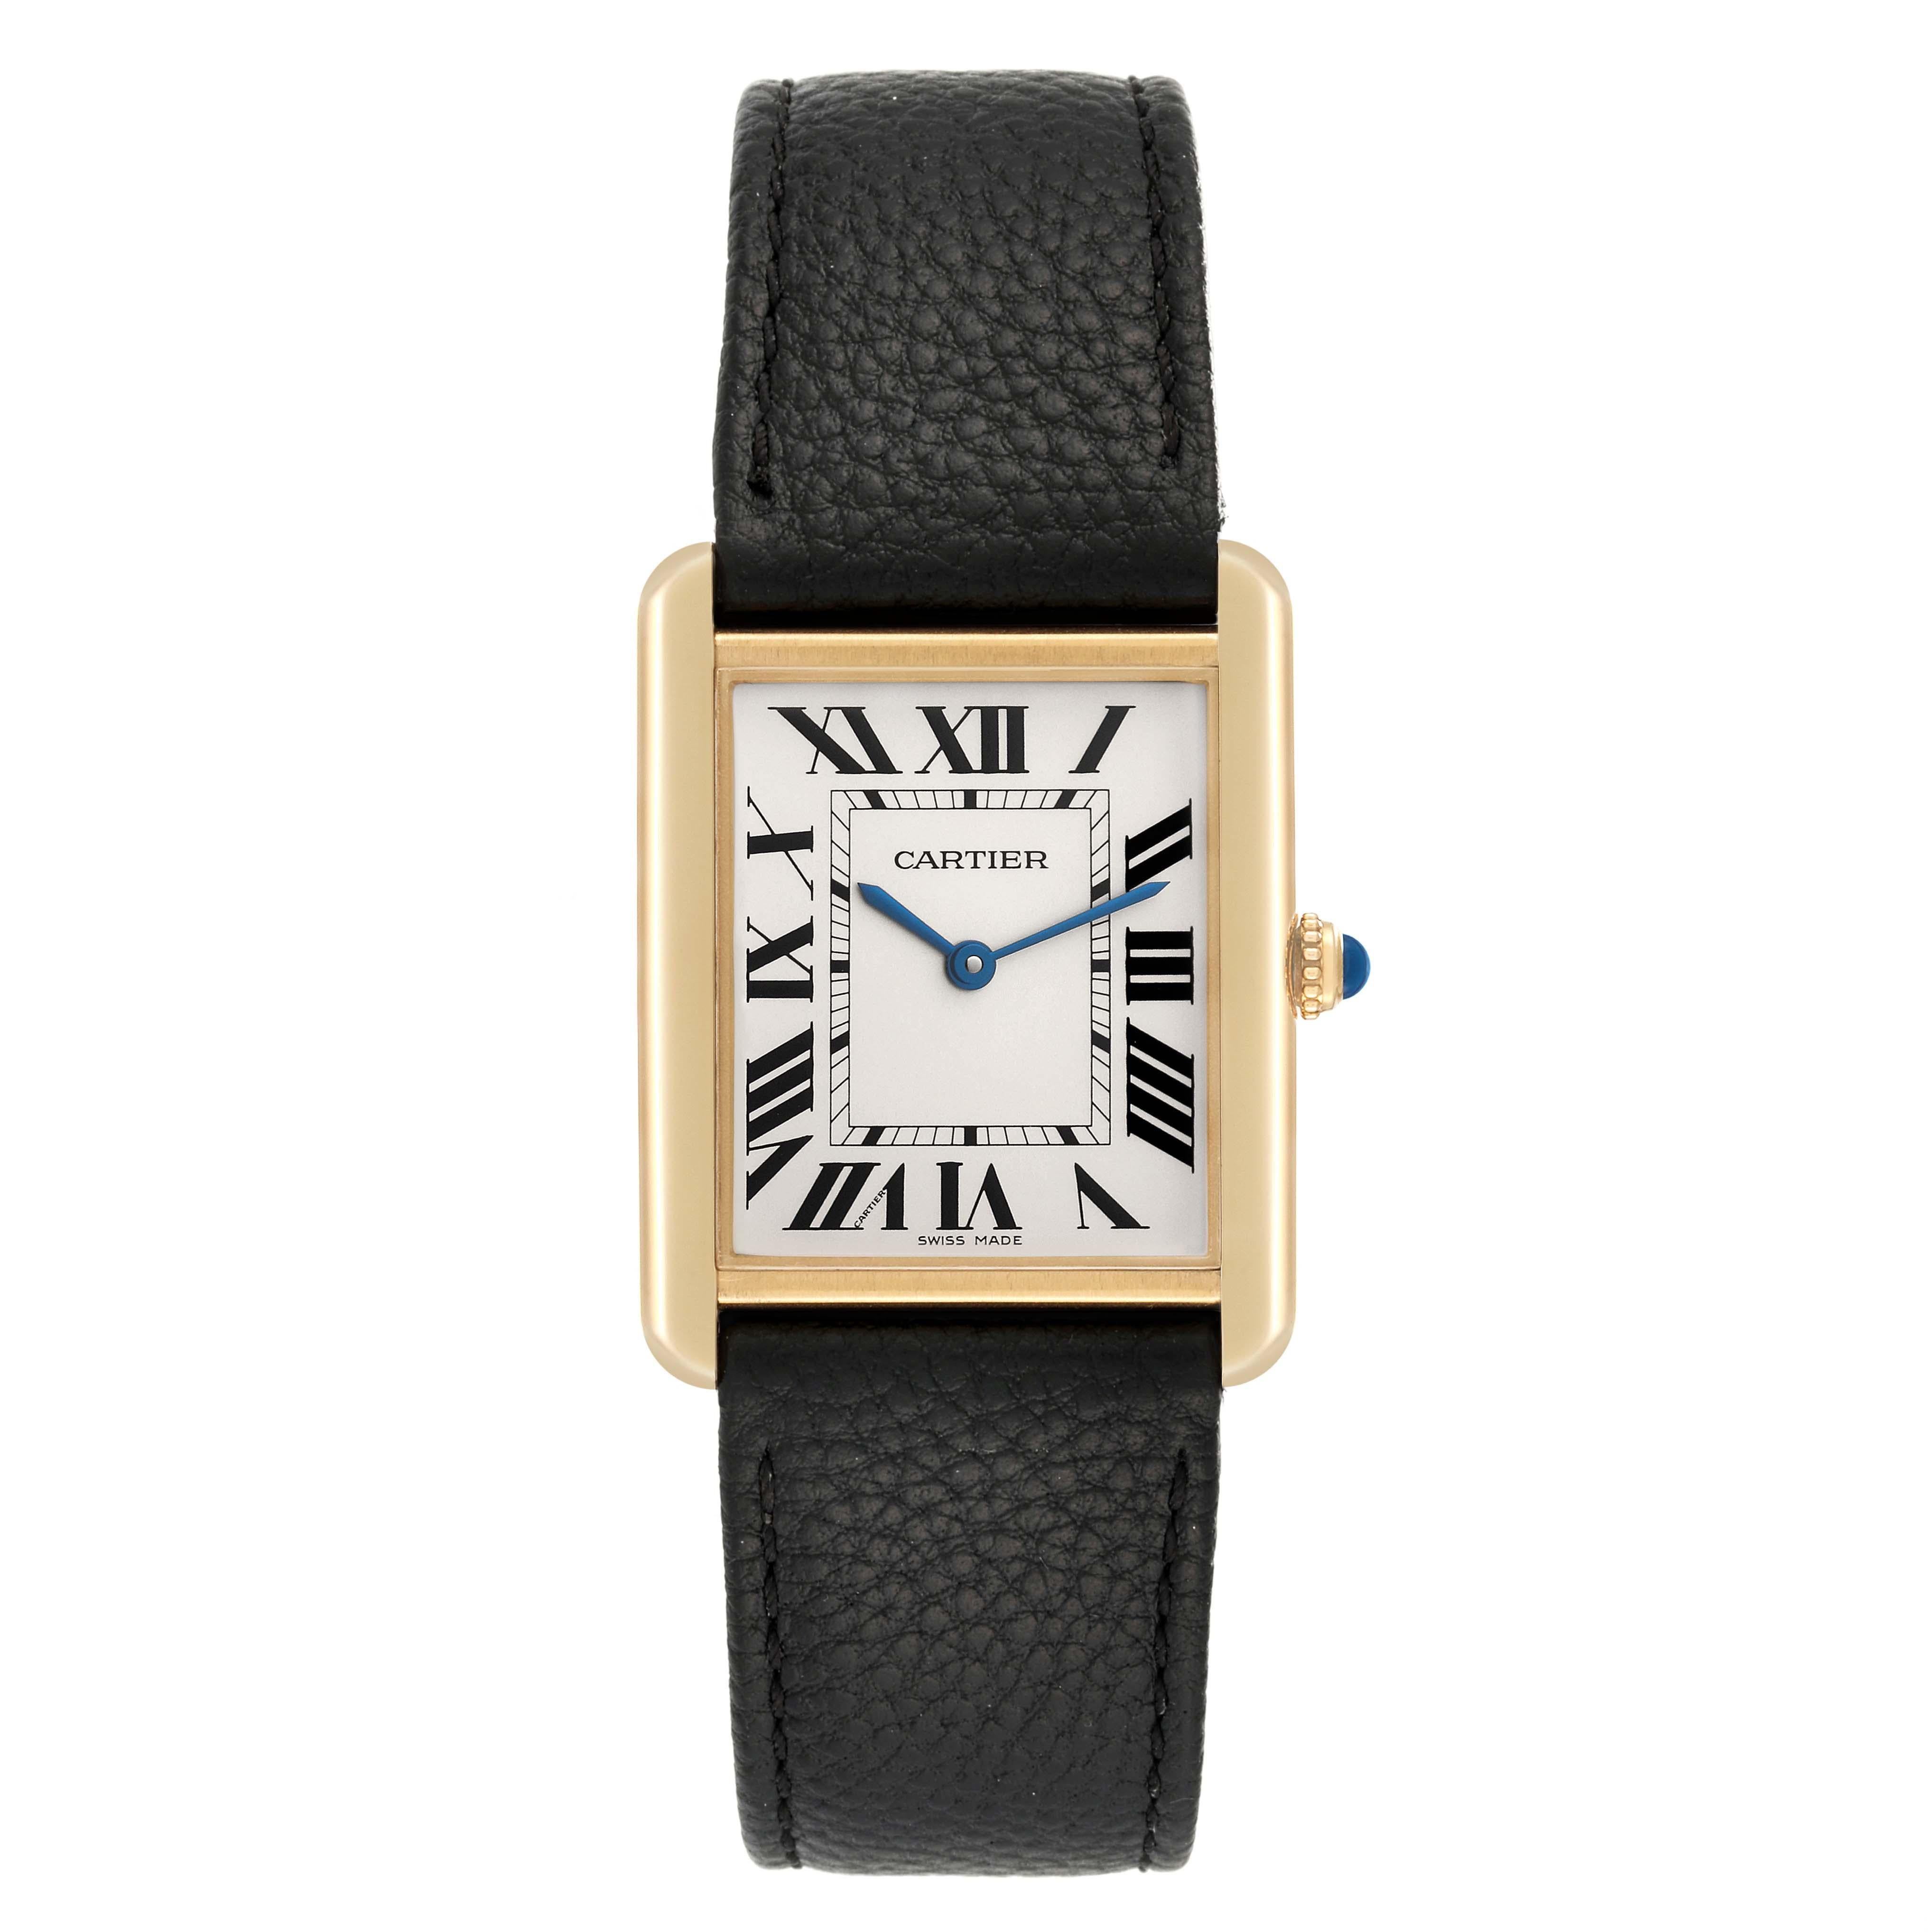 Cartier Tank Solo Yellow Gold Steel Black Strap Mens Watch W1018855. Quartz movement. 18k yellow gold/steel caseback 34.0 x 27.0 mm. Circular grained crown set with a blue spinel cabochon. . Scratch resistant sapphire crystal. Silver opaline dial